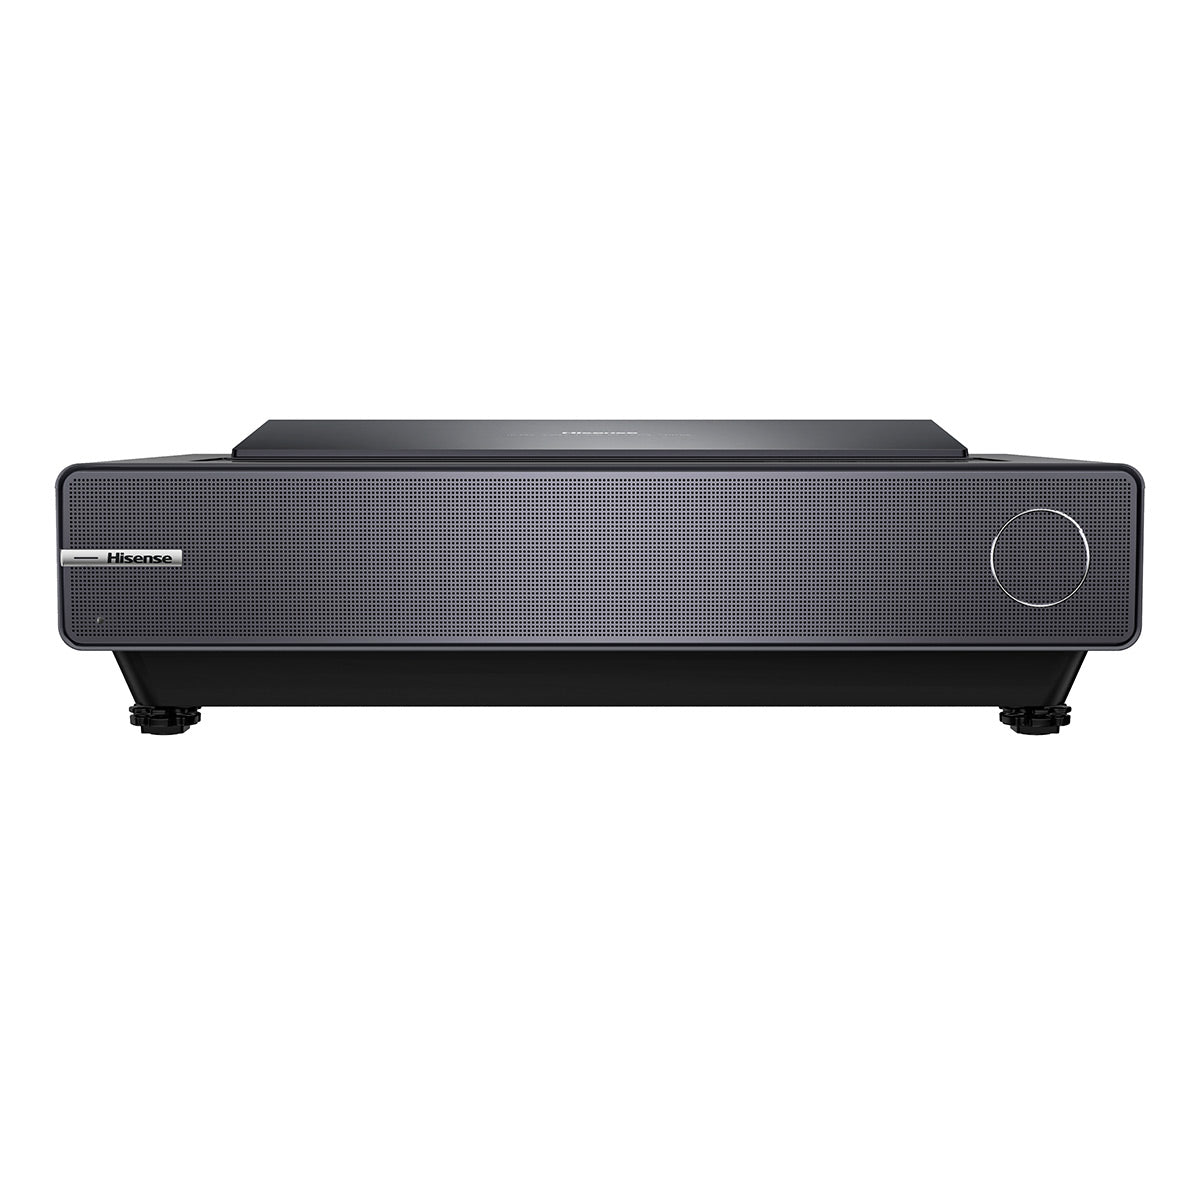 Hisense PX2-PRO TriChroma 4K Ultra Short Throw Laser Cinema Projector with Dolby Vision, Dolby Atmos, & Google TV